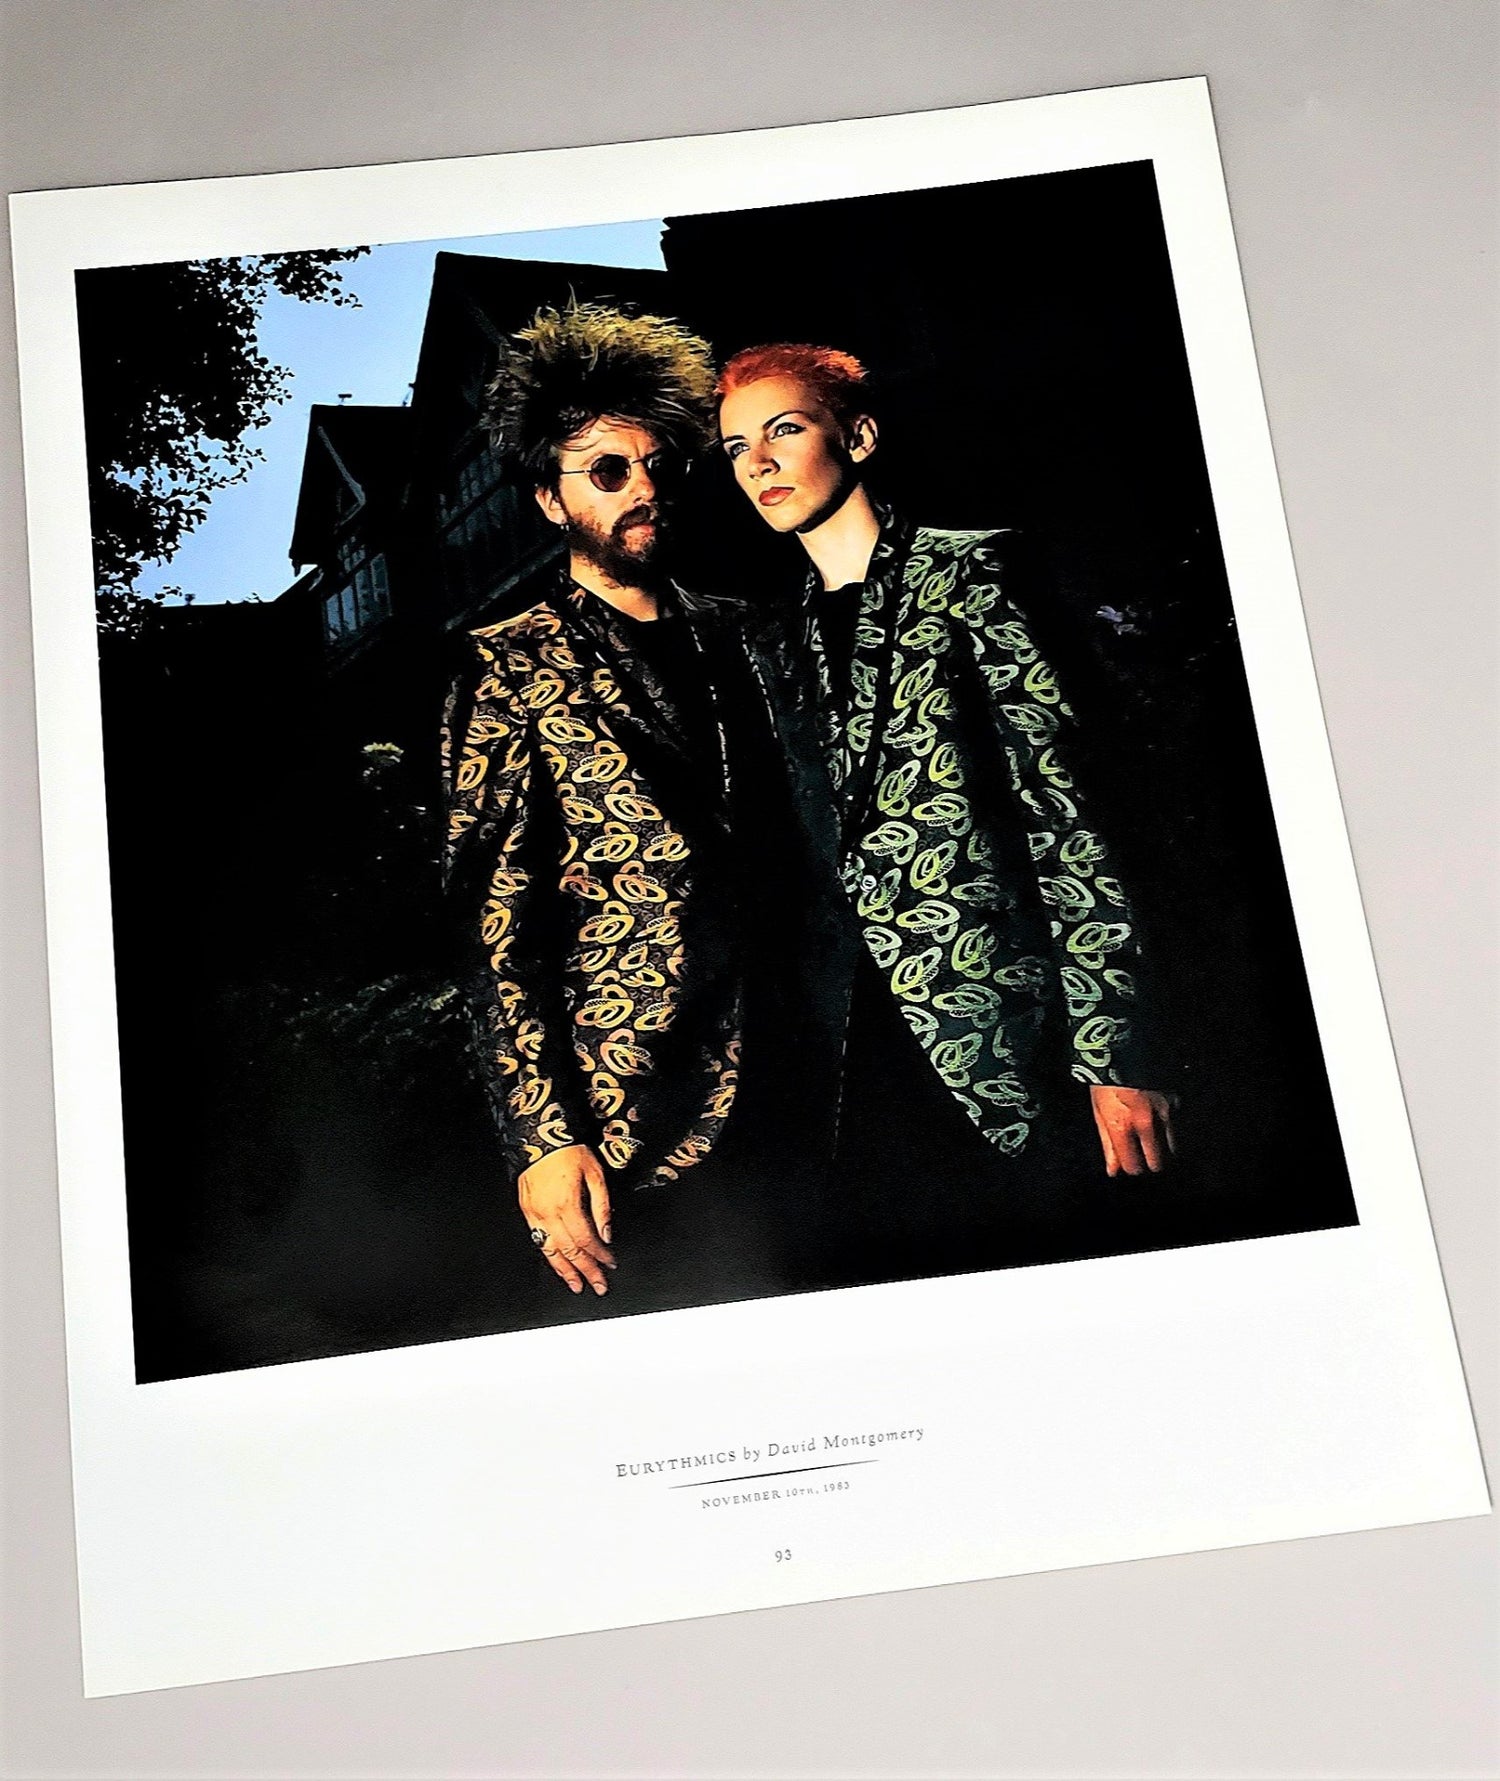 Vintage photograph page of the Eurythmics photographed by David Montgomery in 1983